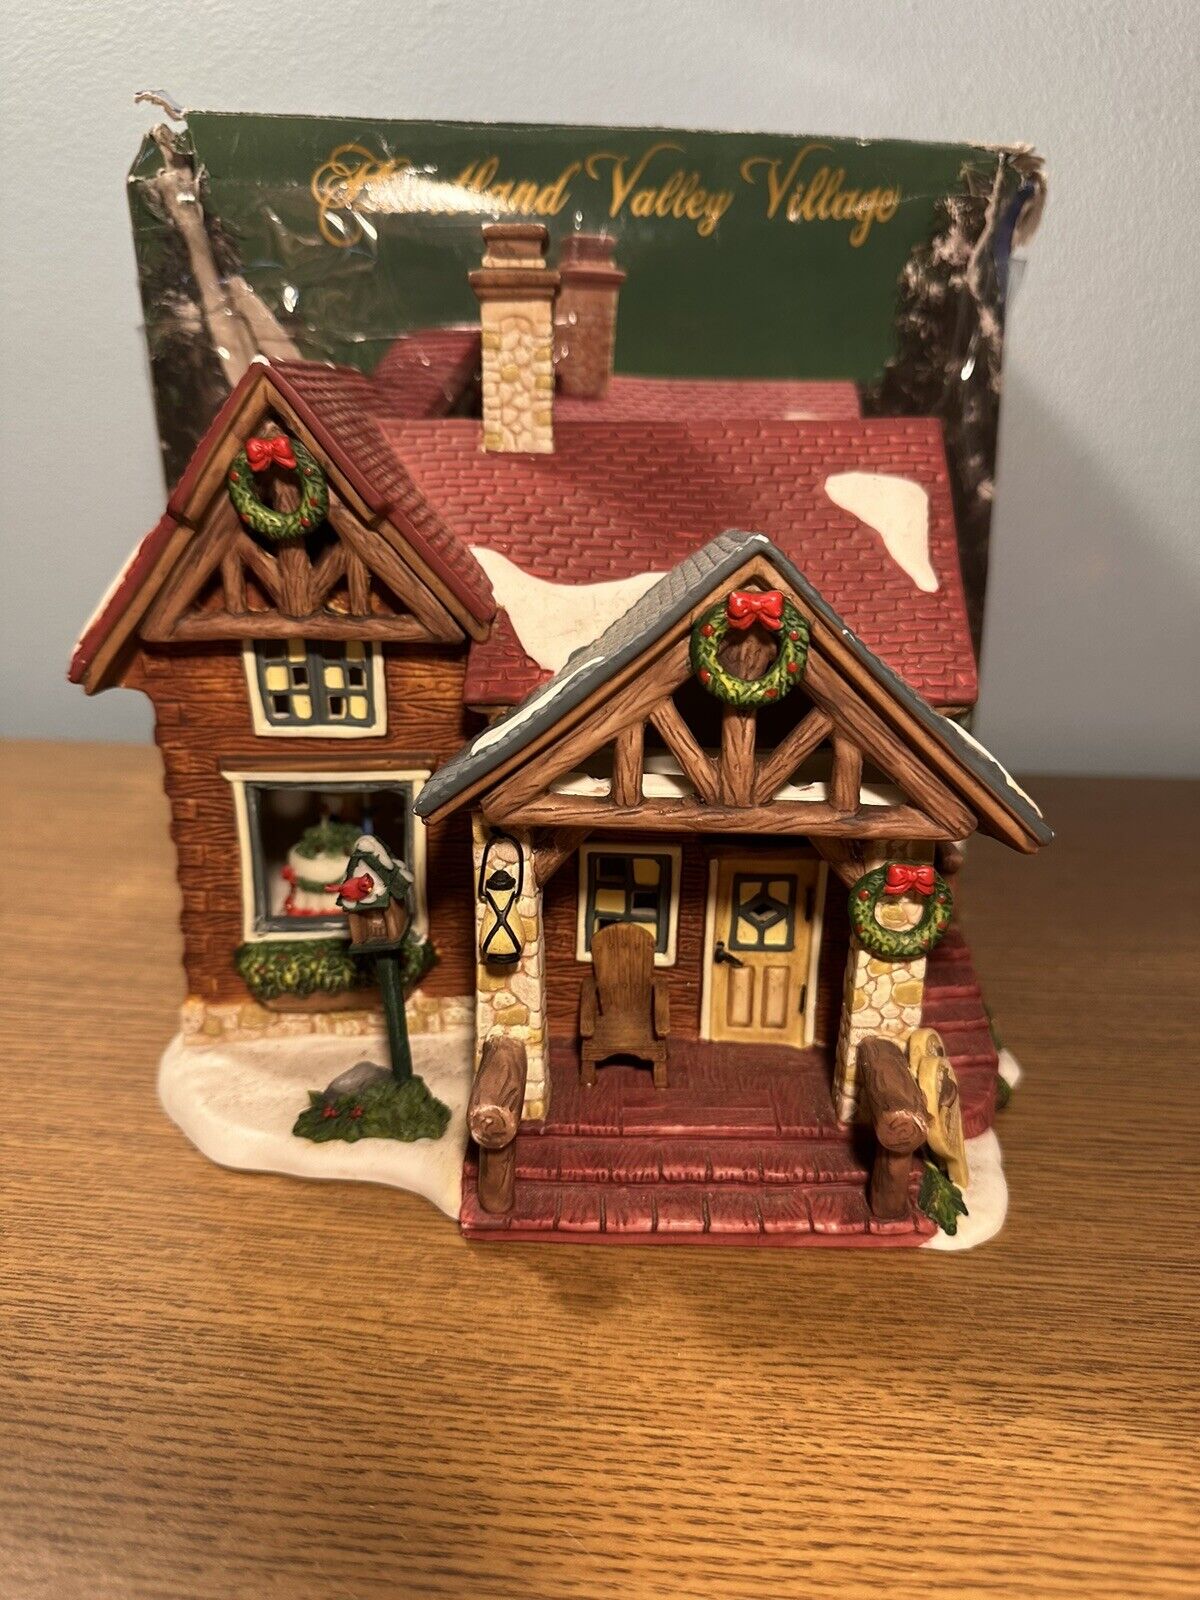 2004 Heartland Valley Village Lighted Christmas House Briscoe Lodge